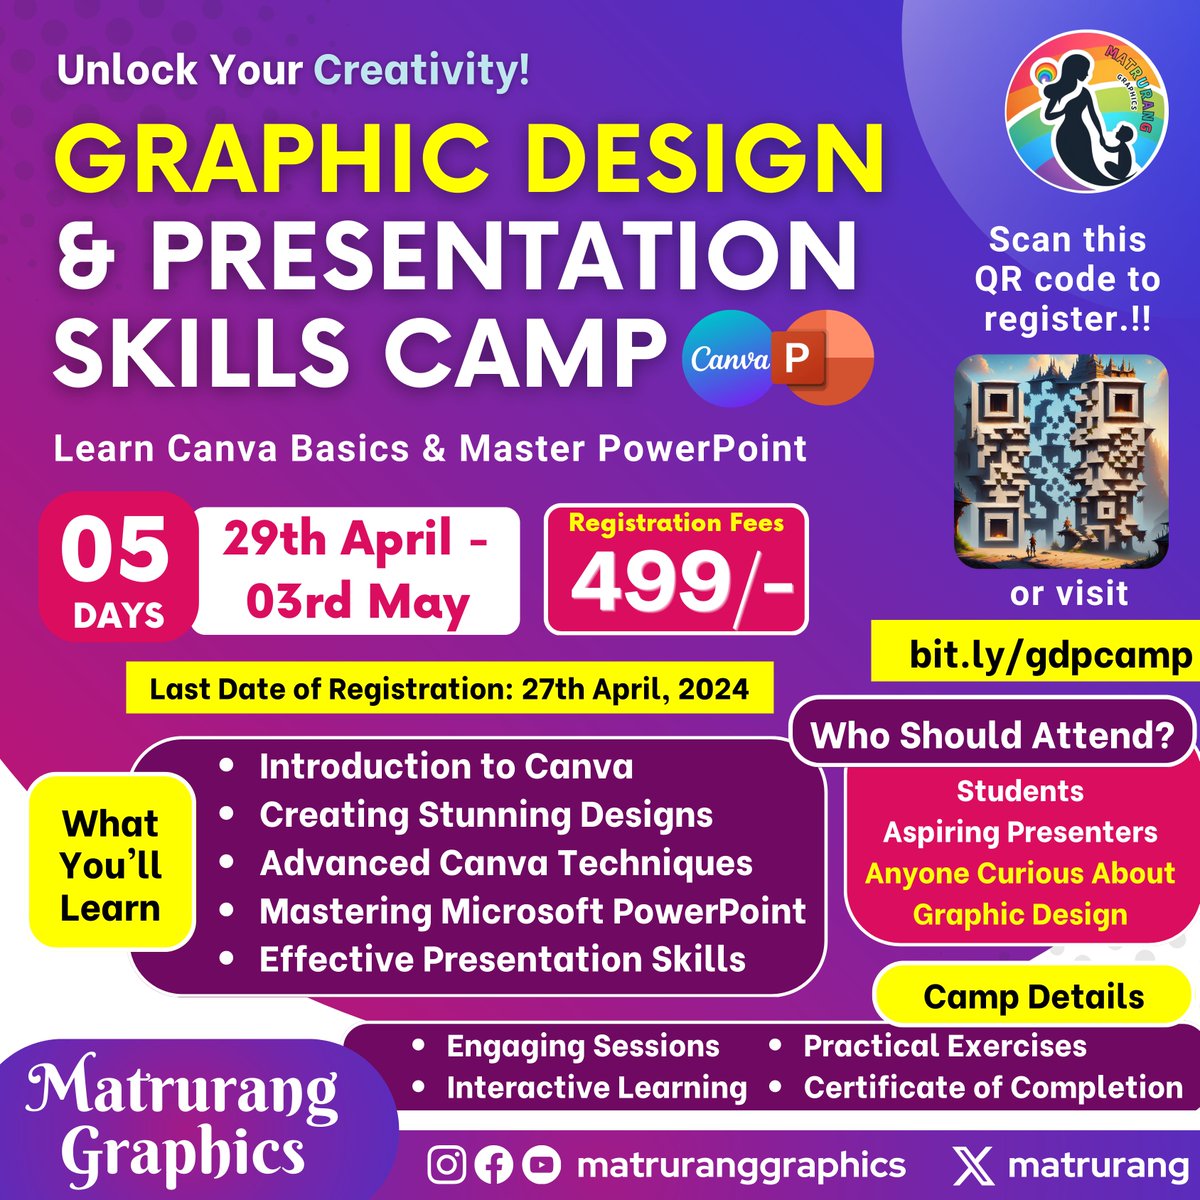 Join our Graphic Design & Presentation Skills Camp & master Canva basics and PowerPoint magic. Limited spots available!  #canva #instagram #design #canvadesign #art #graphicdesign #marketing #o #canvalove #digitalmarketing #socialmediamarketing #quotes #love #canvapro #instagood